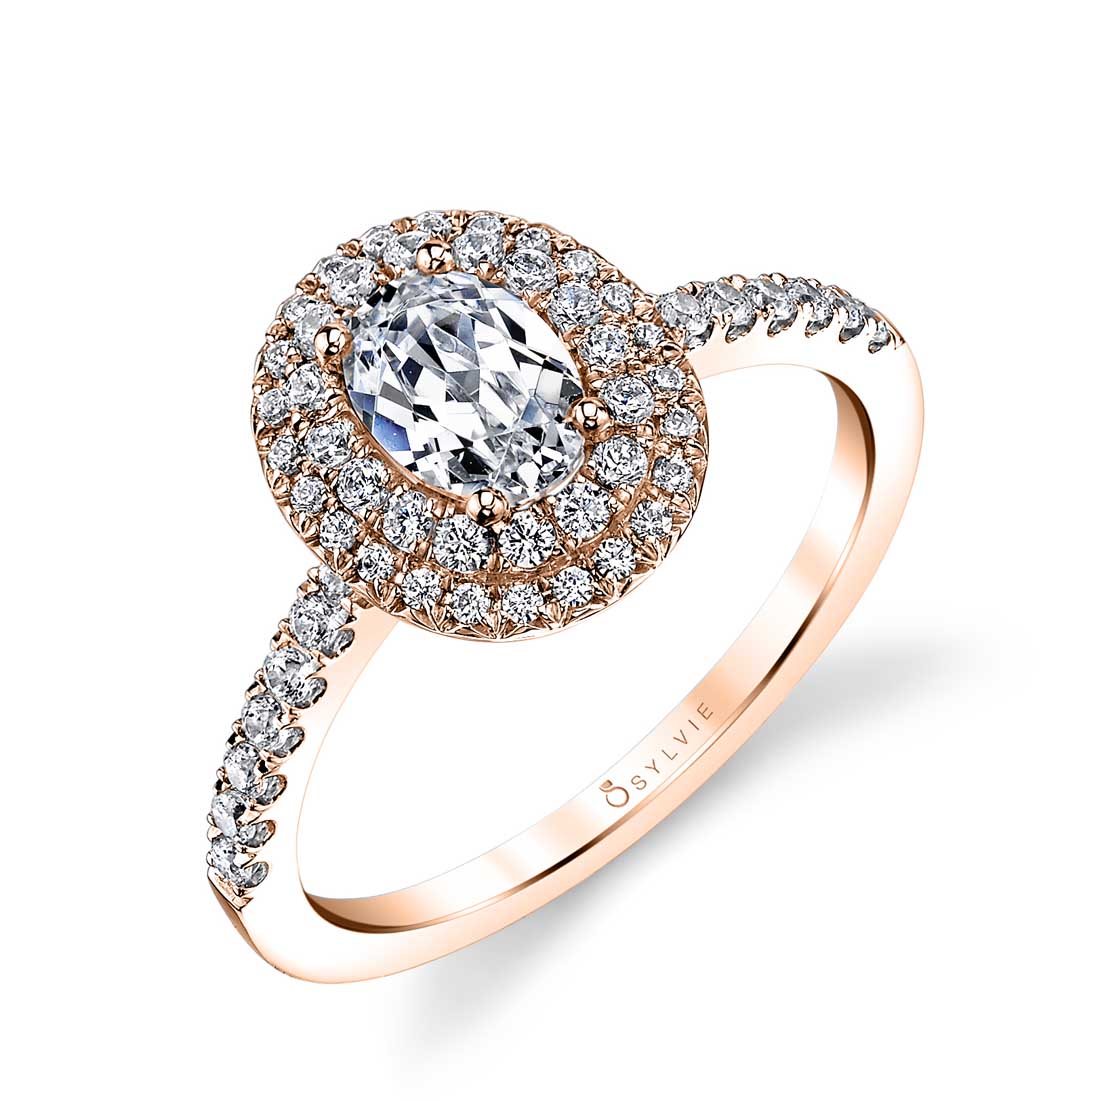 Double Halo Engagement Ring